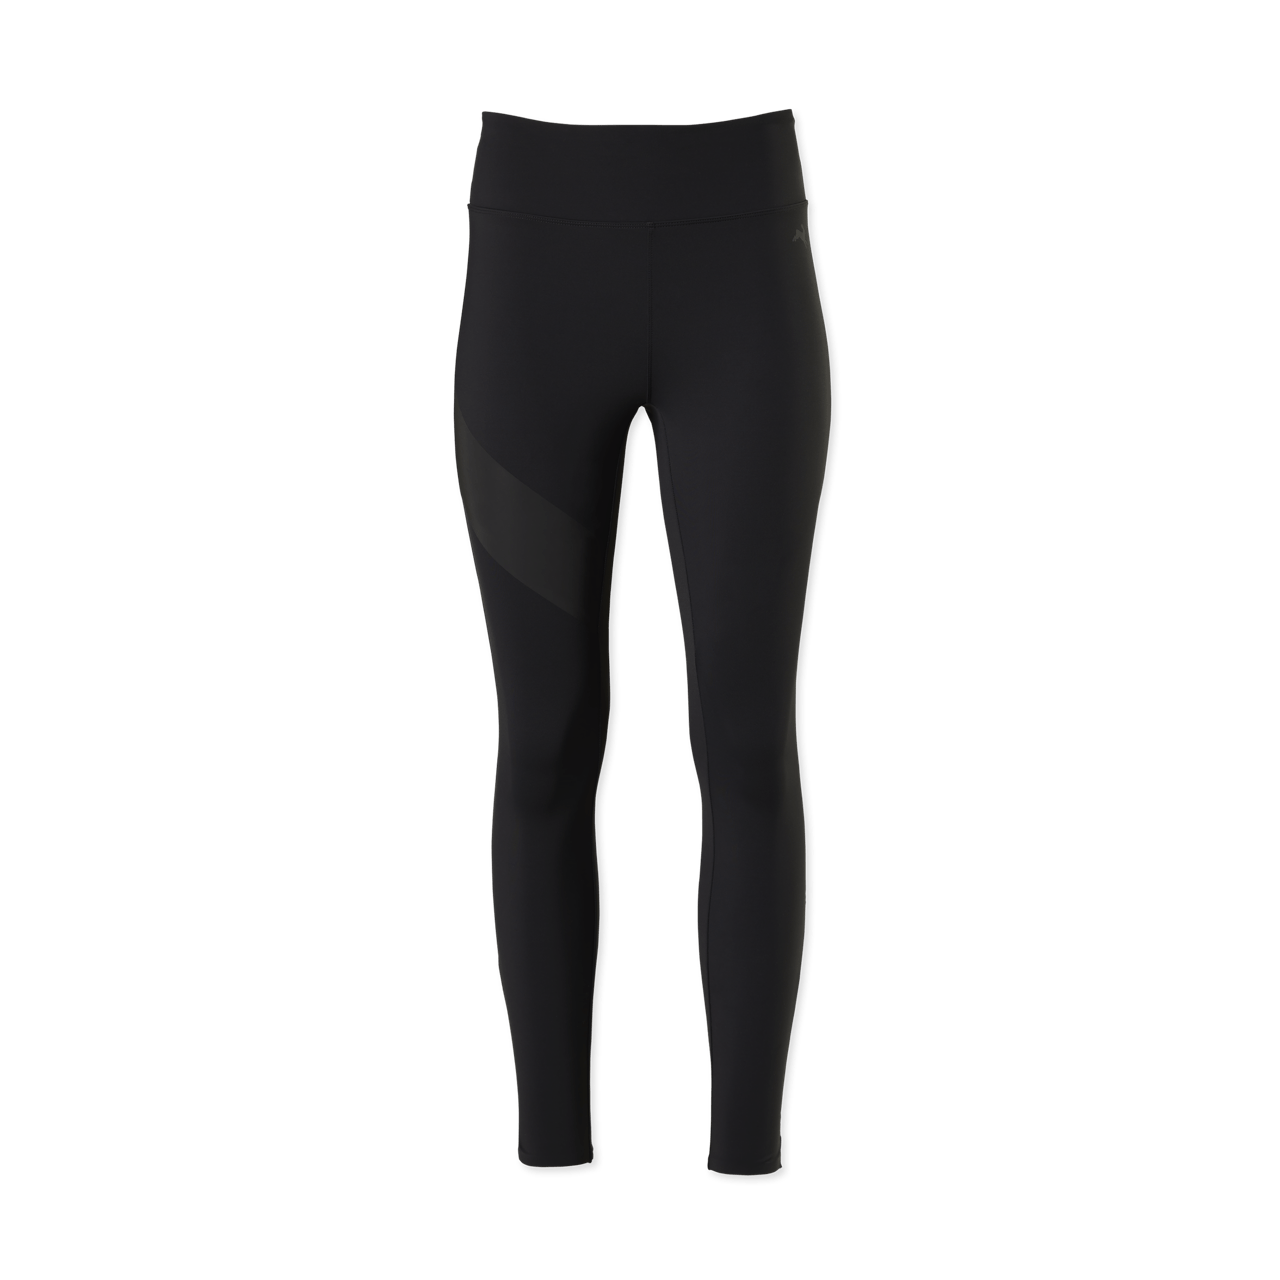 A New Approach to Winter Tights from Tracksmith - Desktop Email